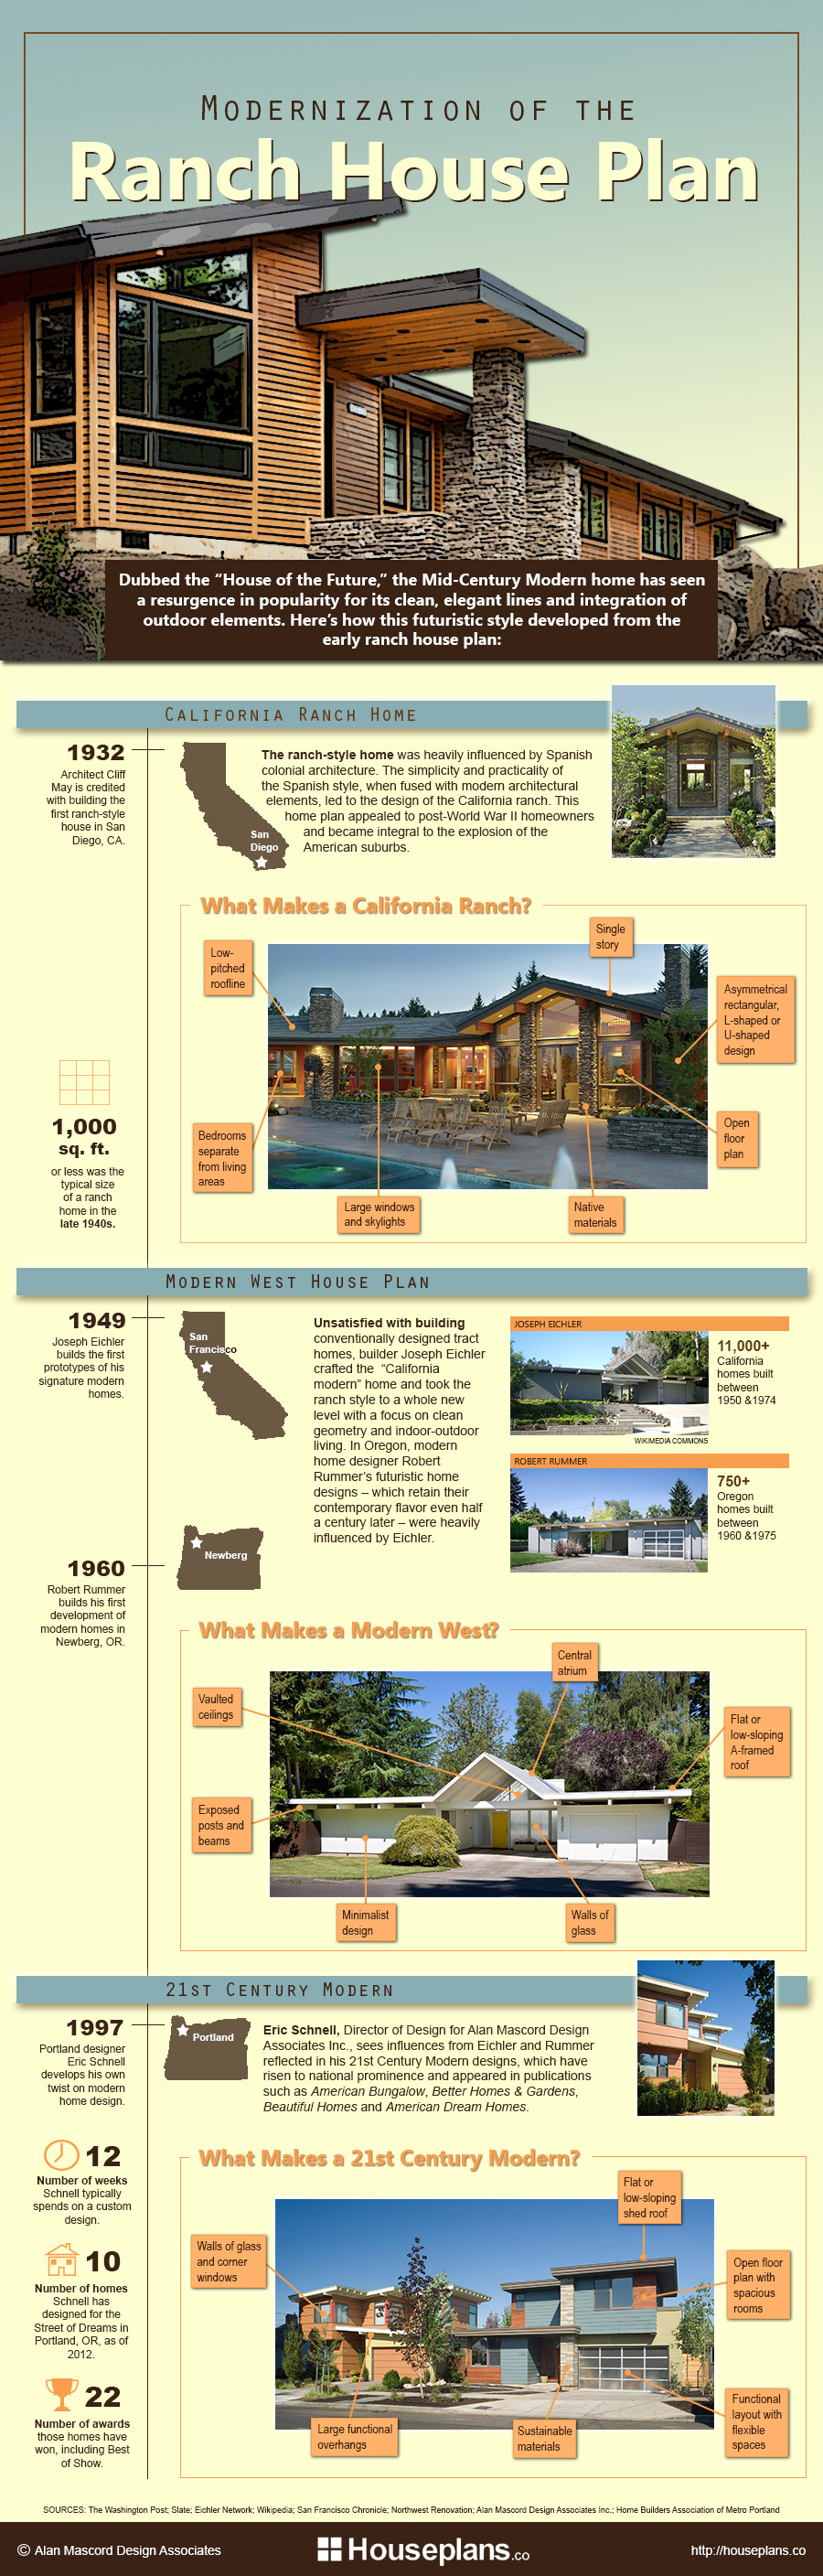 Modernization of the Ranch House Plan Infographic by Houseplans.co